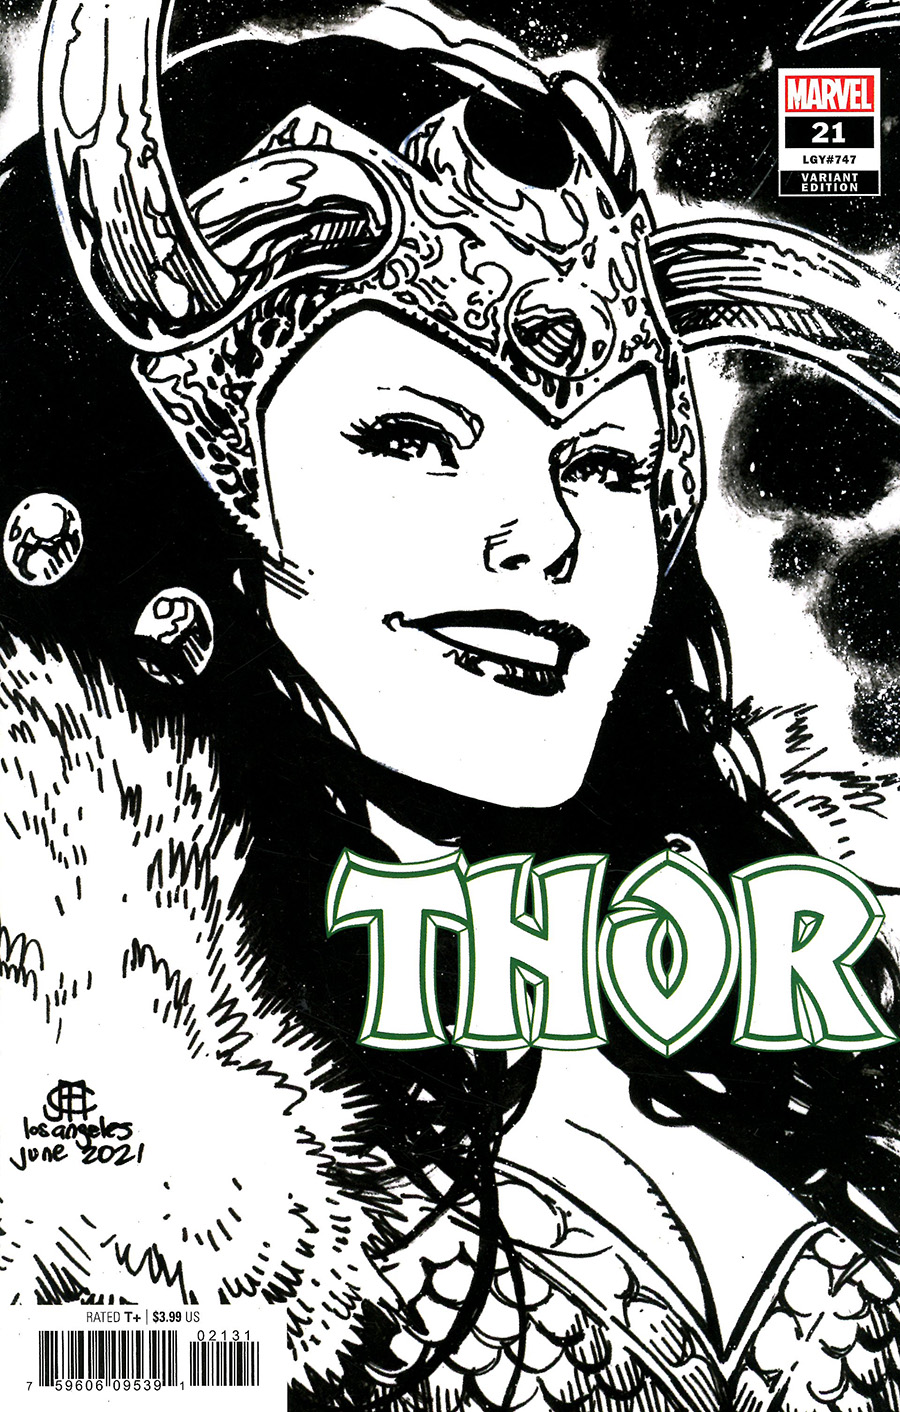 Thor Vol 6 #21 Cover C Variant Jim Cheung Headshot Sketch Cover (Limit 1 Per Customer)